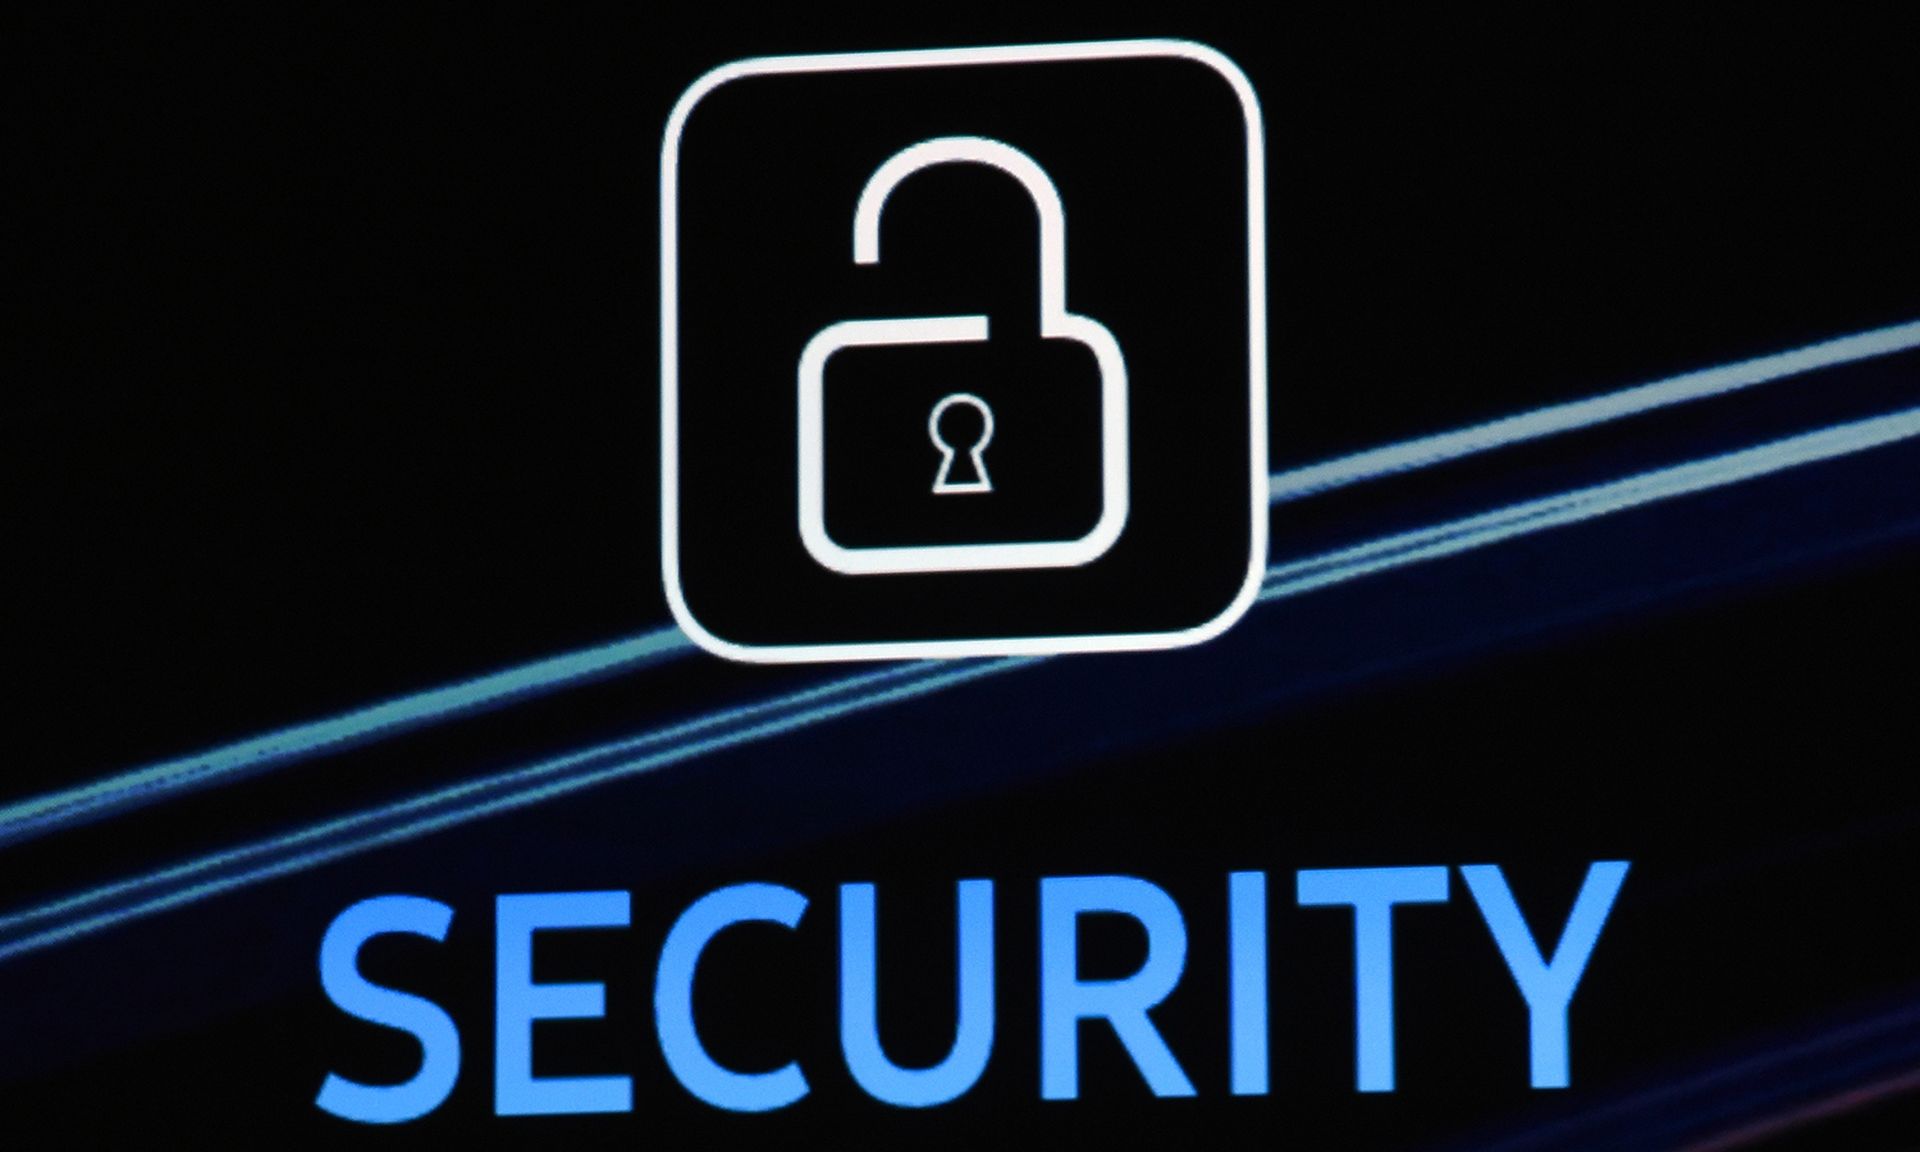 A security logo is shown on screen during a keynote address. (Photo by Ethan Miller/Getty Images)